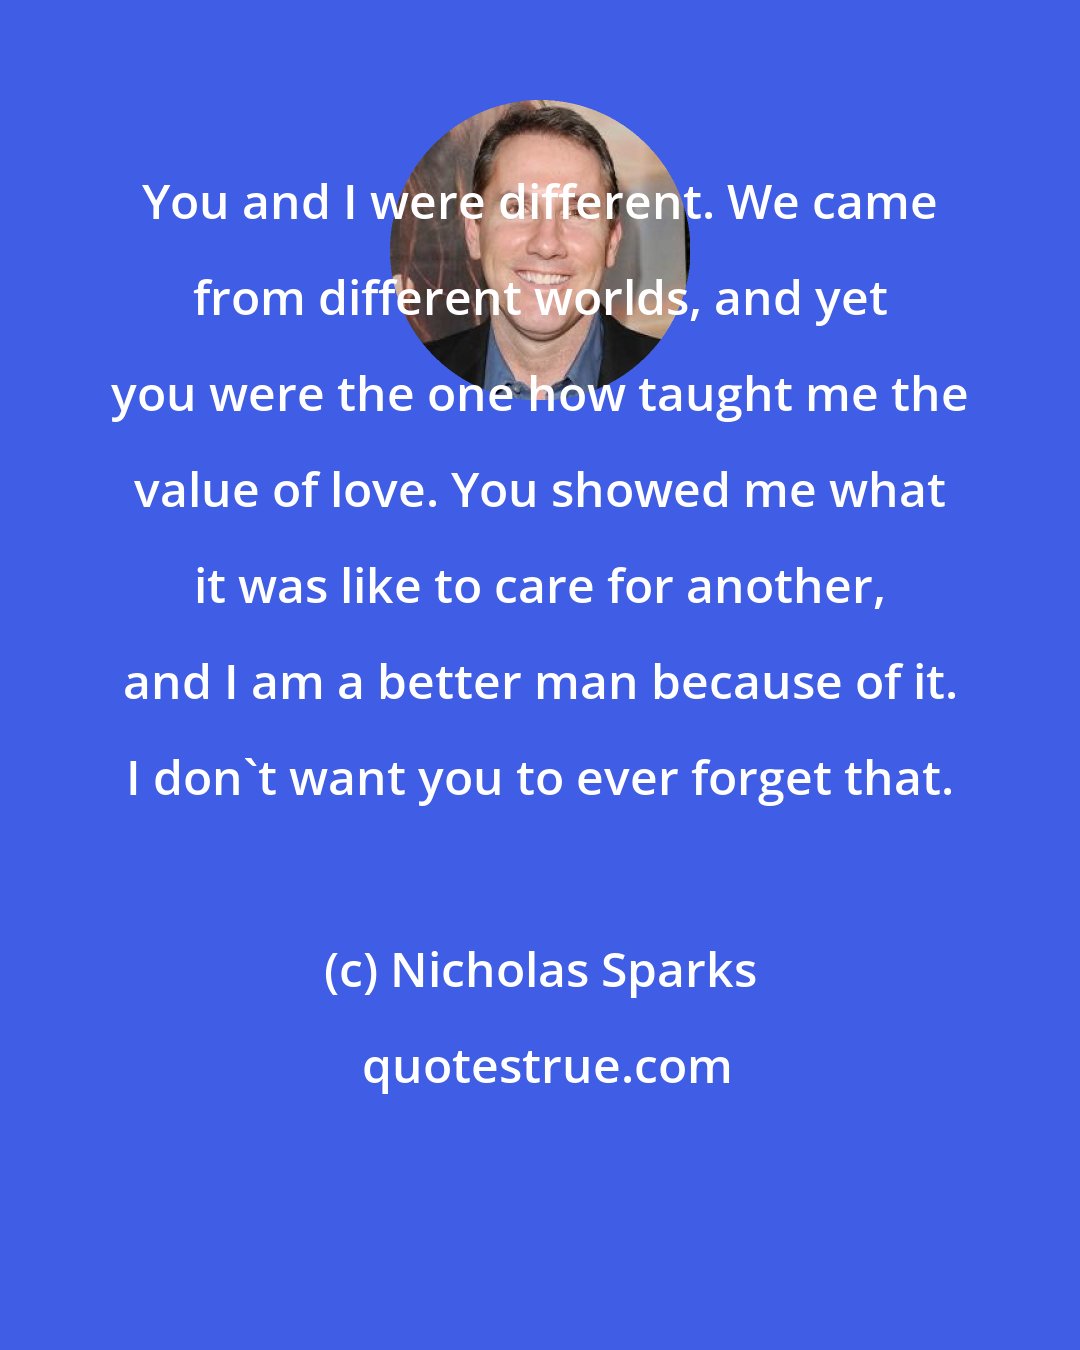 Nicholas Sparks: You and I were different. We came from different worlds, and yet you were the one how taught me the value of love. You showed me what it was like to care for another, and I am a better man because of it. I don't want you to ever forget that.